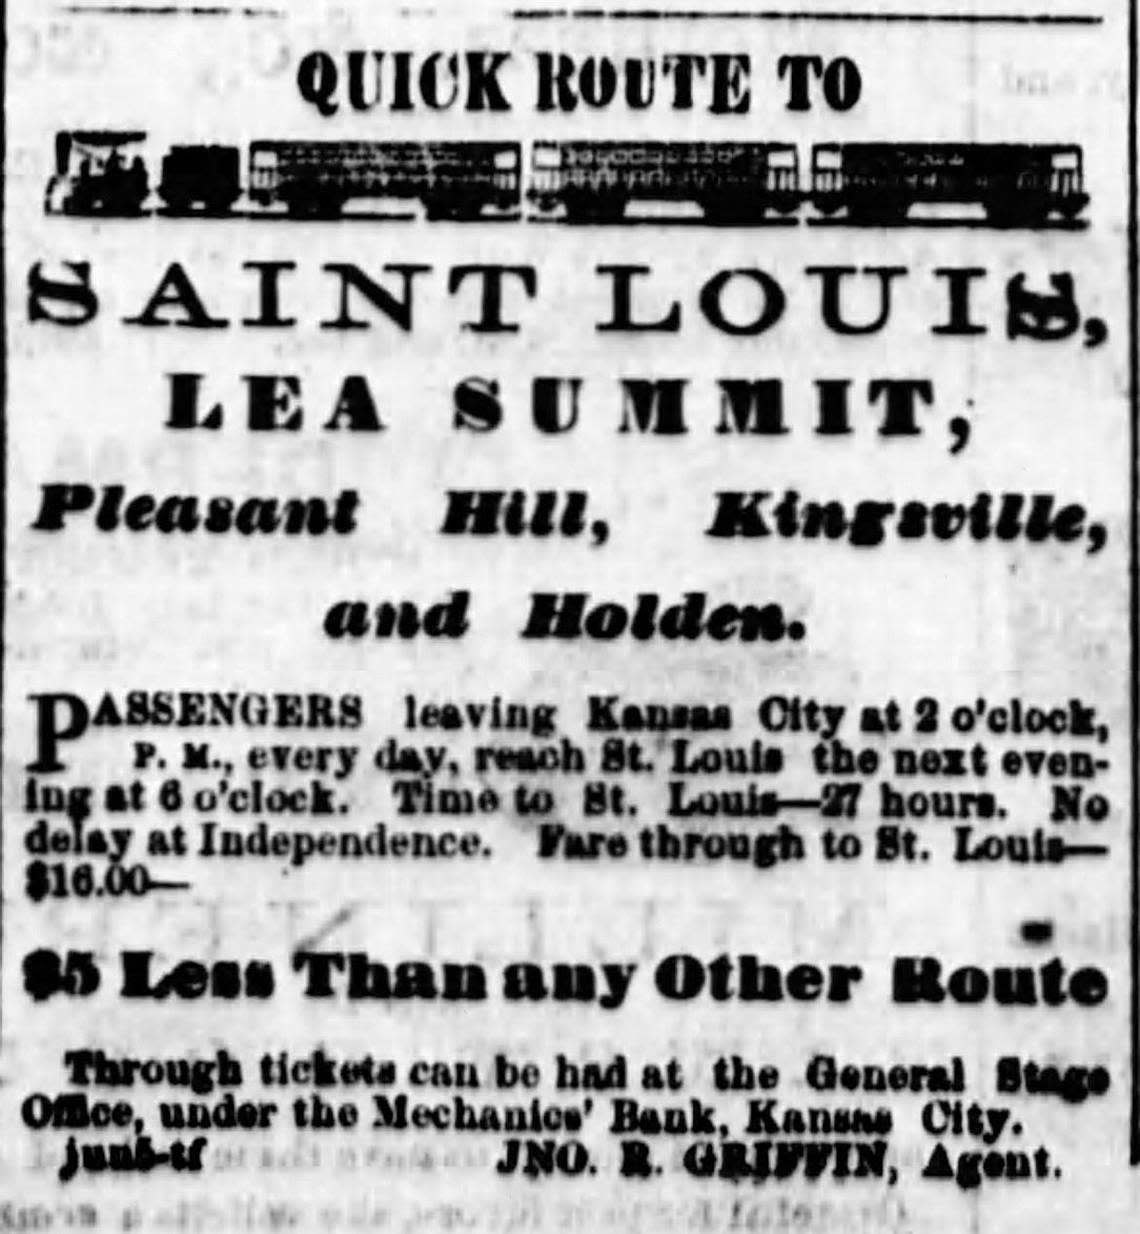 An 1865 ad for speedy transit to Lee’s Summit